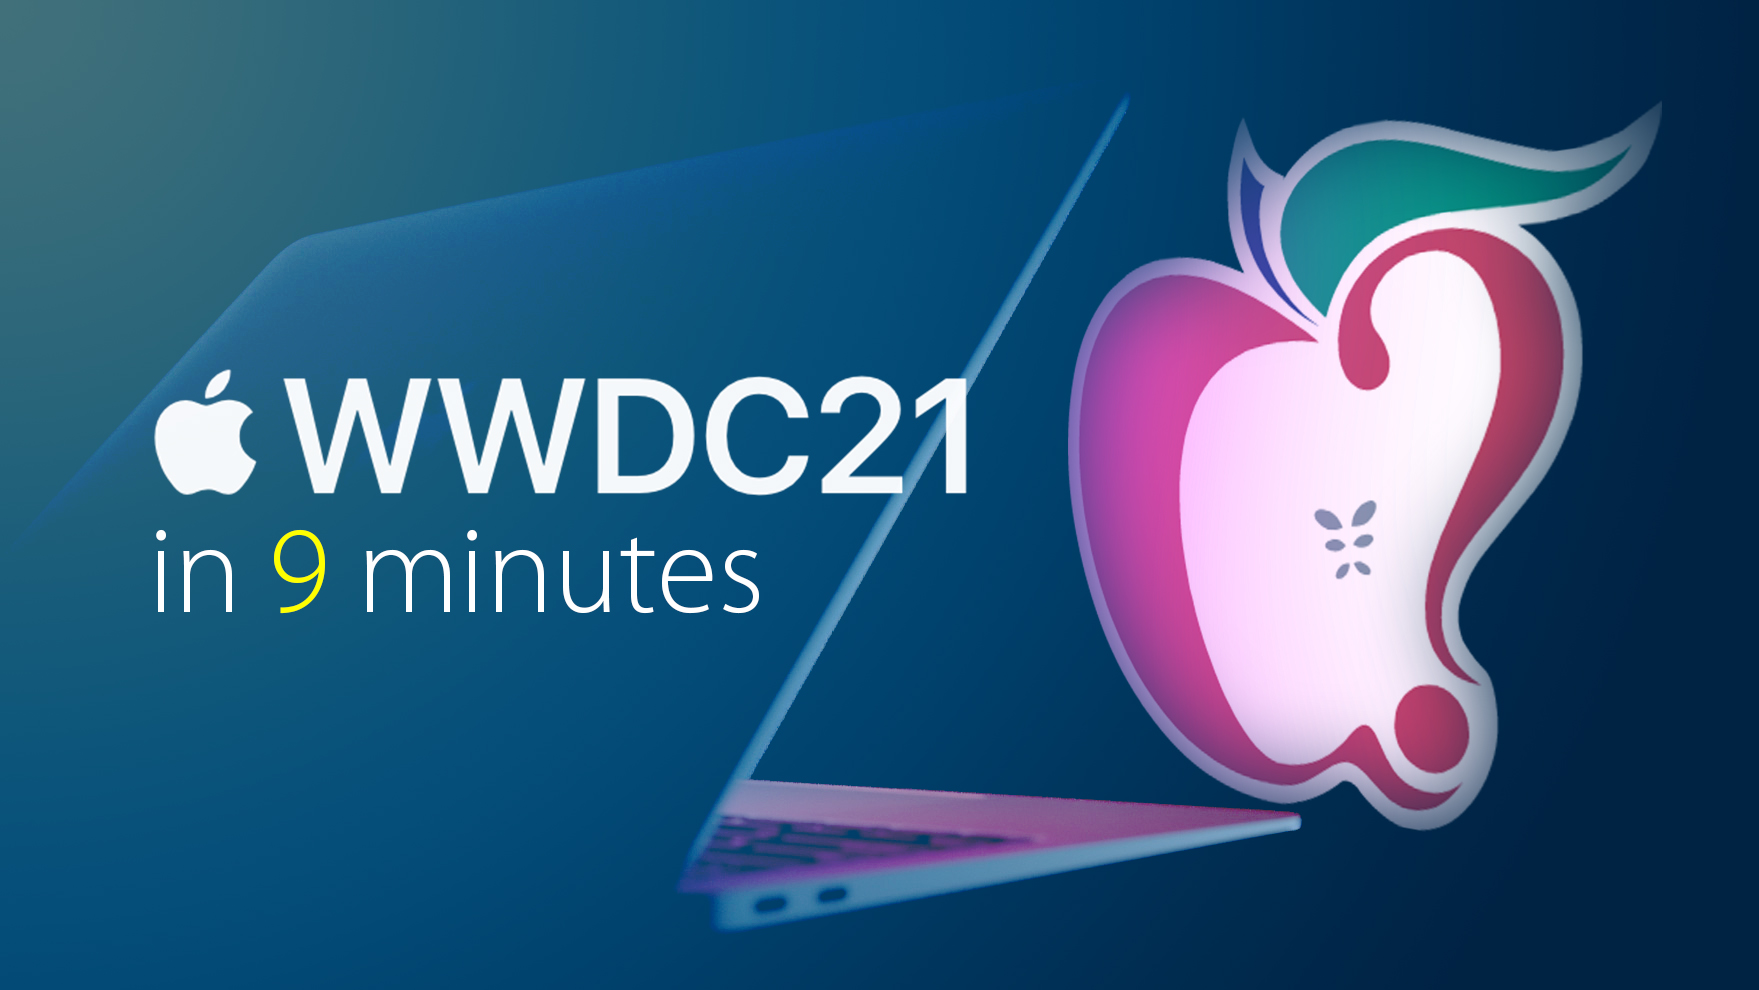 wwdc21-in-9-minutes-feature-2.1.jpg